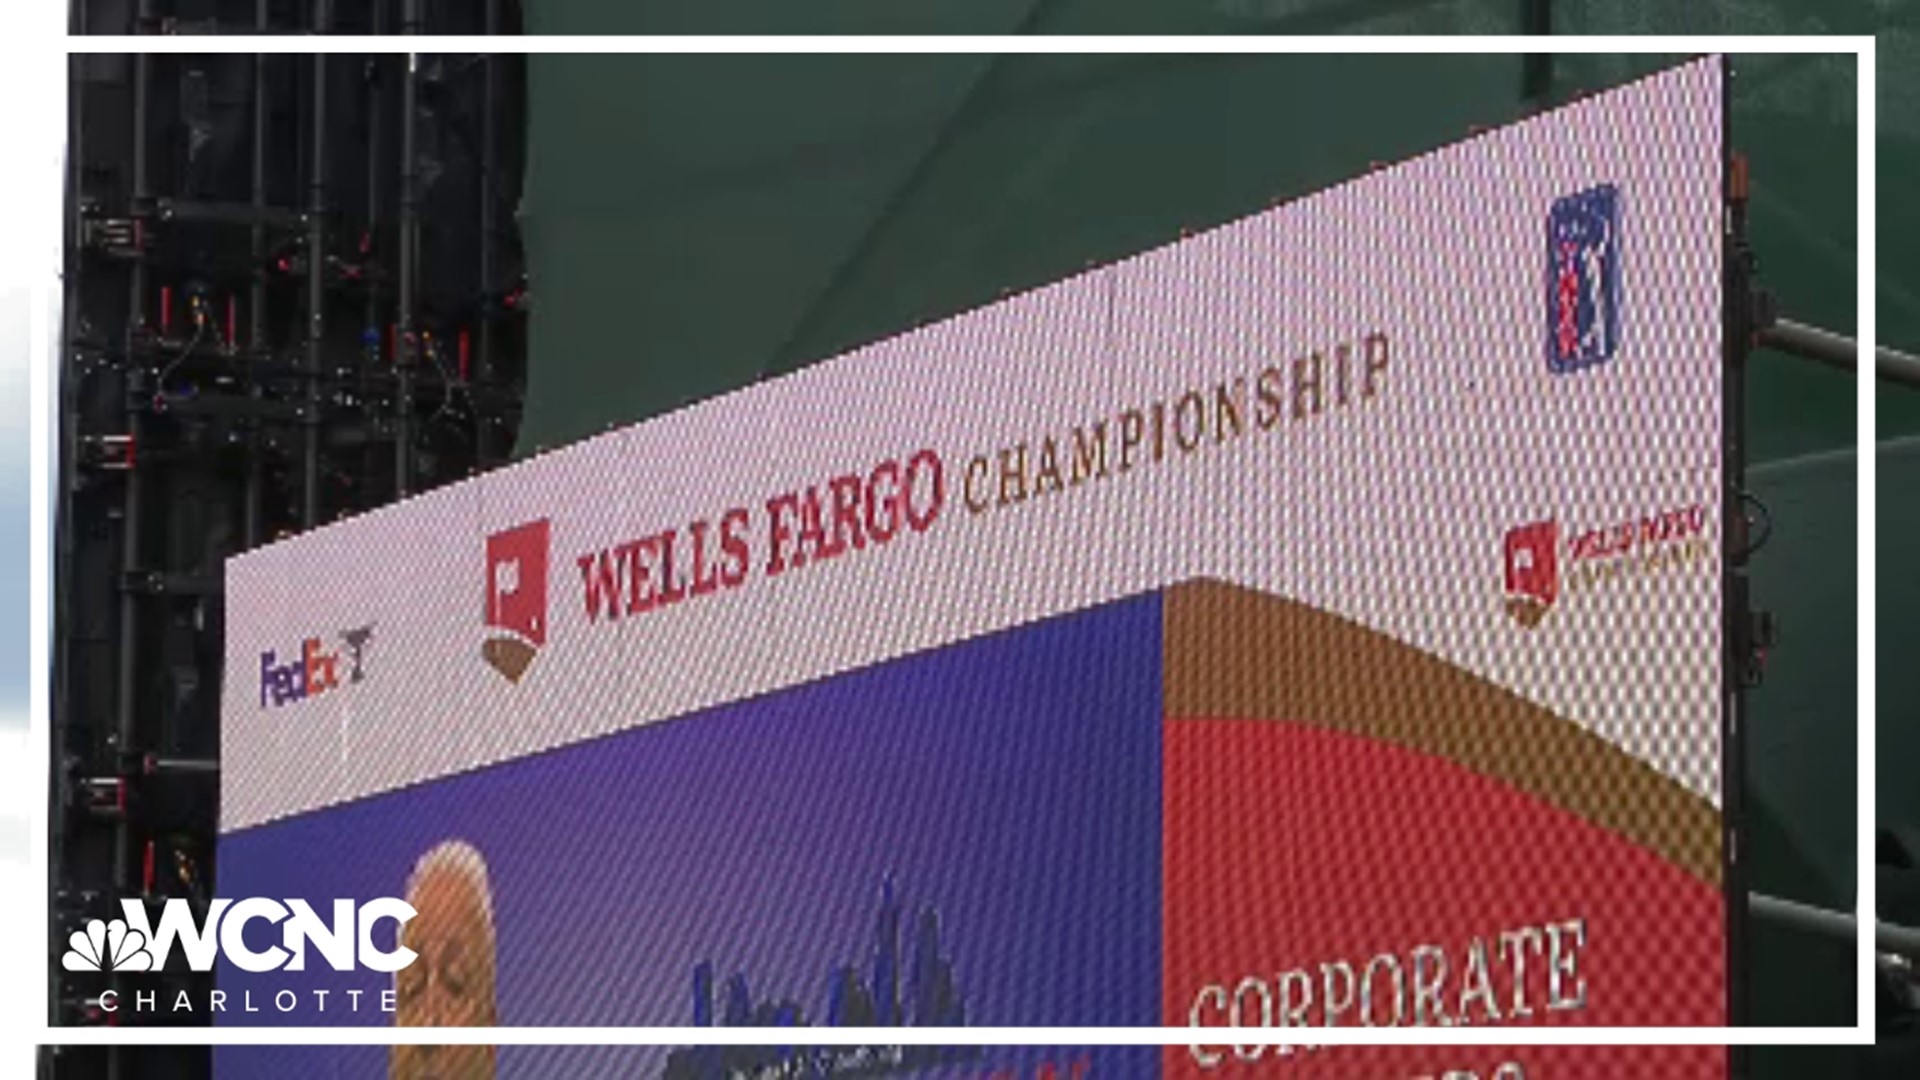 Wells Fargo says this year will be its last year sponsoring the PGA event at Quail Hollow.